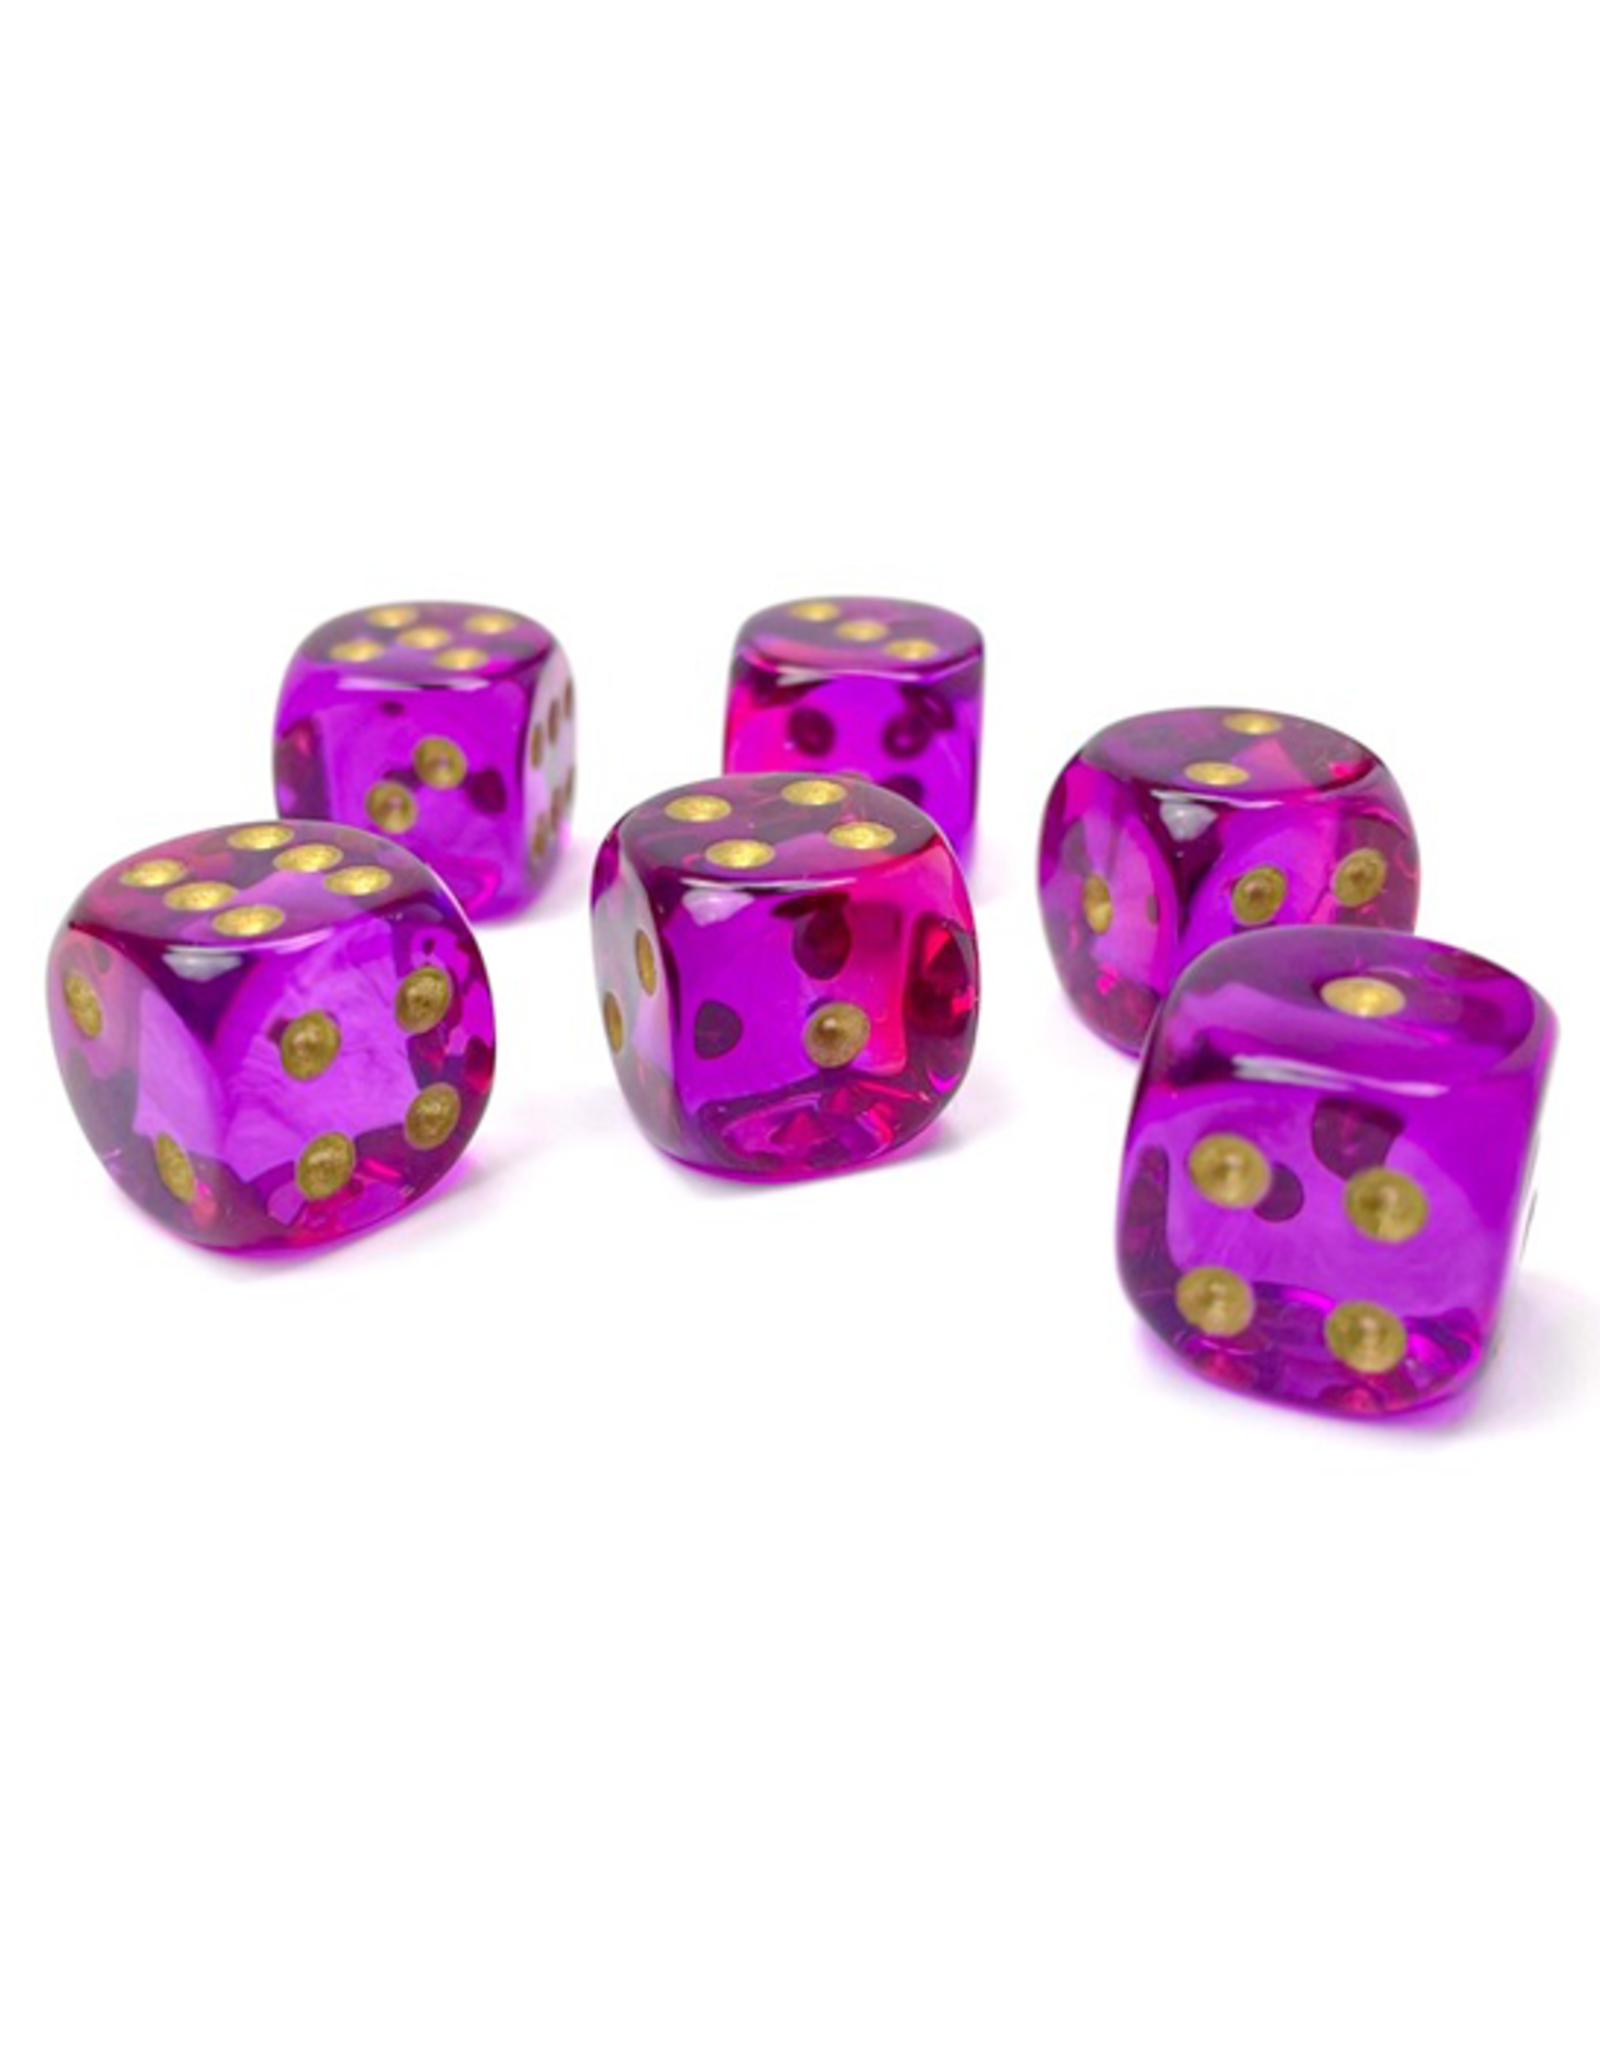 Chessex Chessex: 16mm D6 - Gemini - Translucent Red-Violet w/ Gold